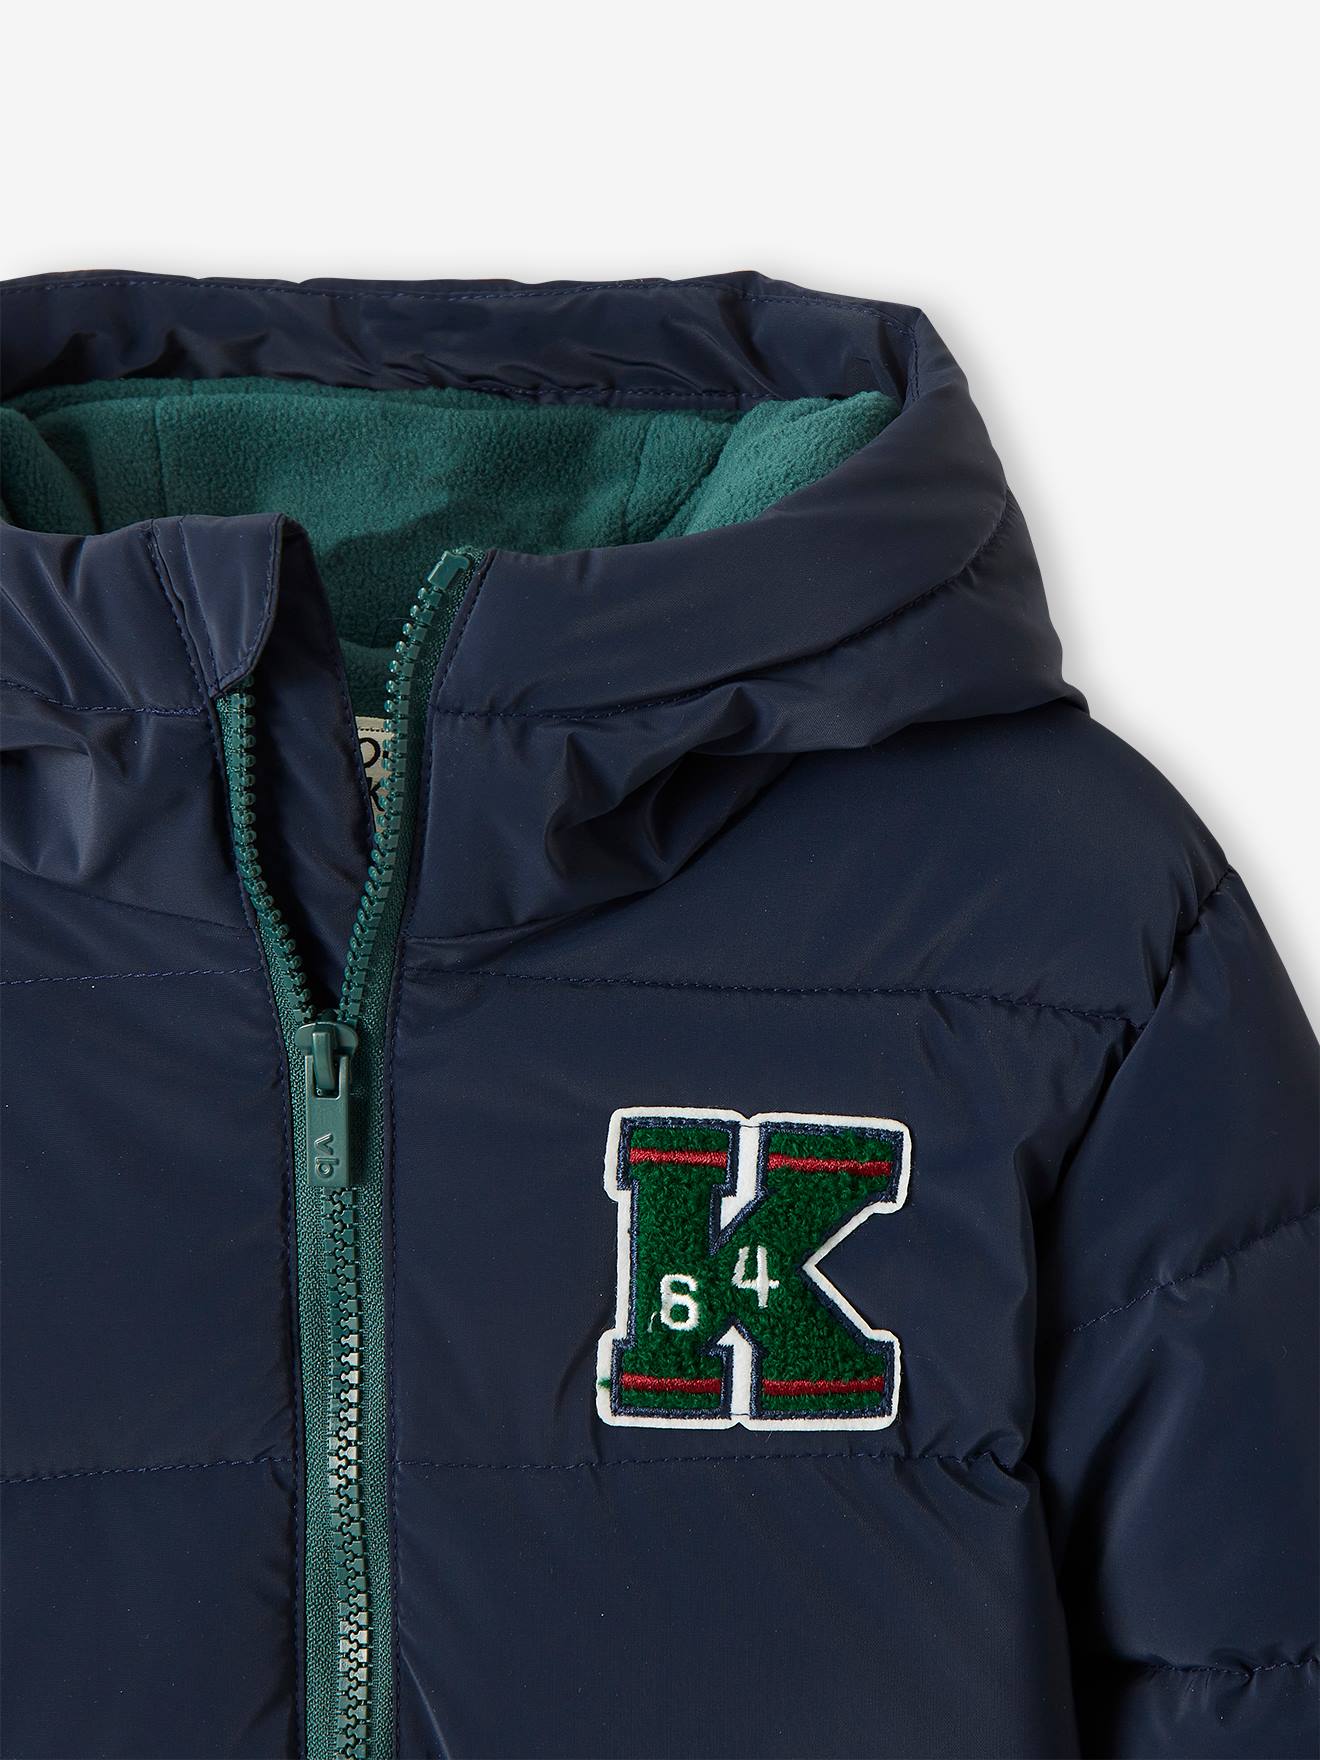 College Style Padded Jacket with Badge & Lined in Polar Fleece for